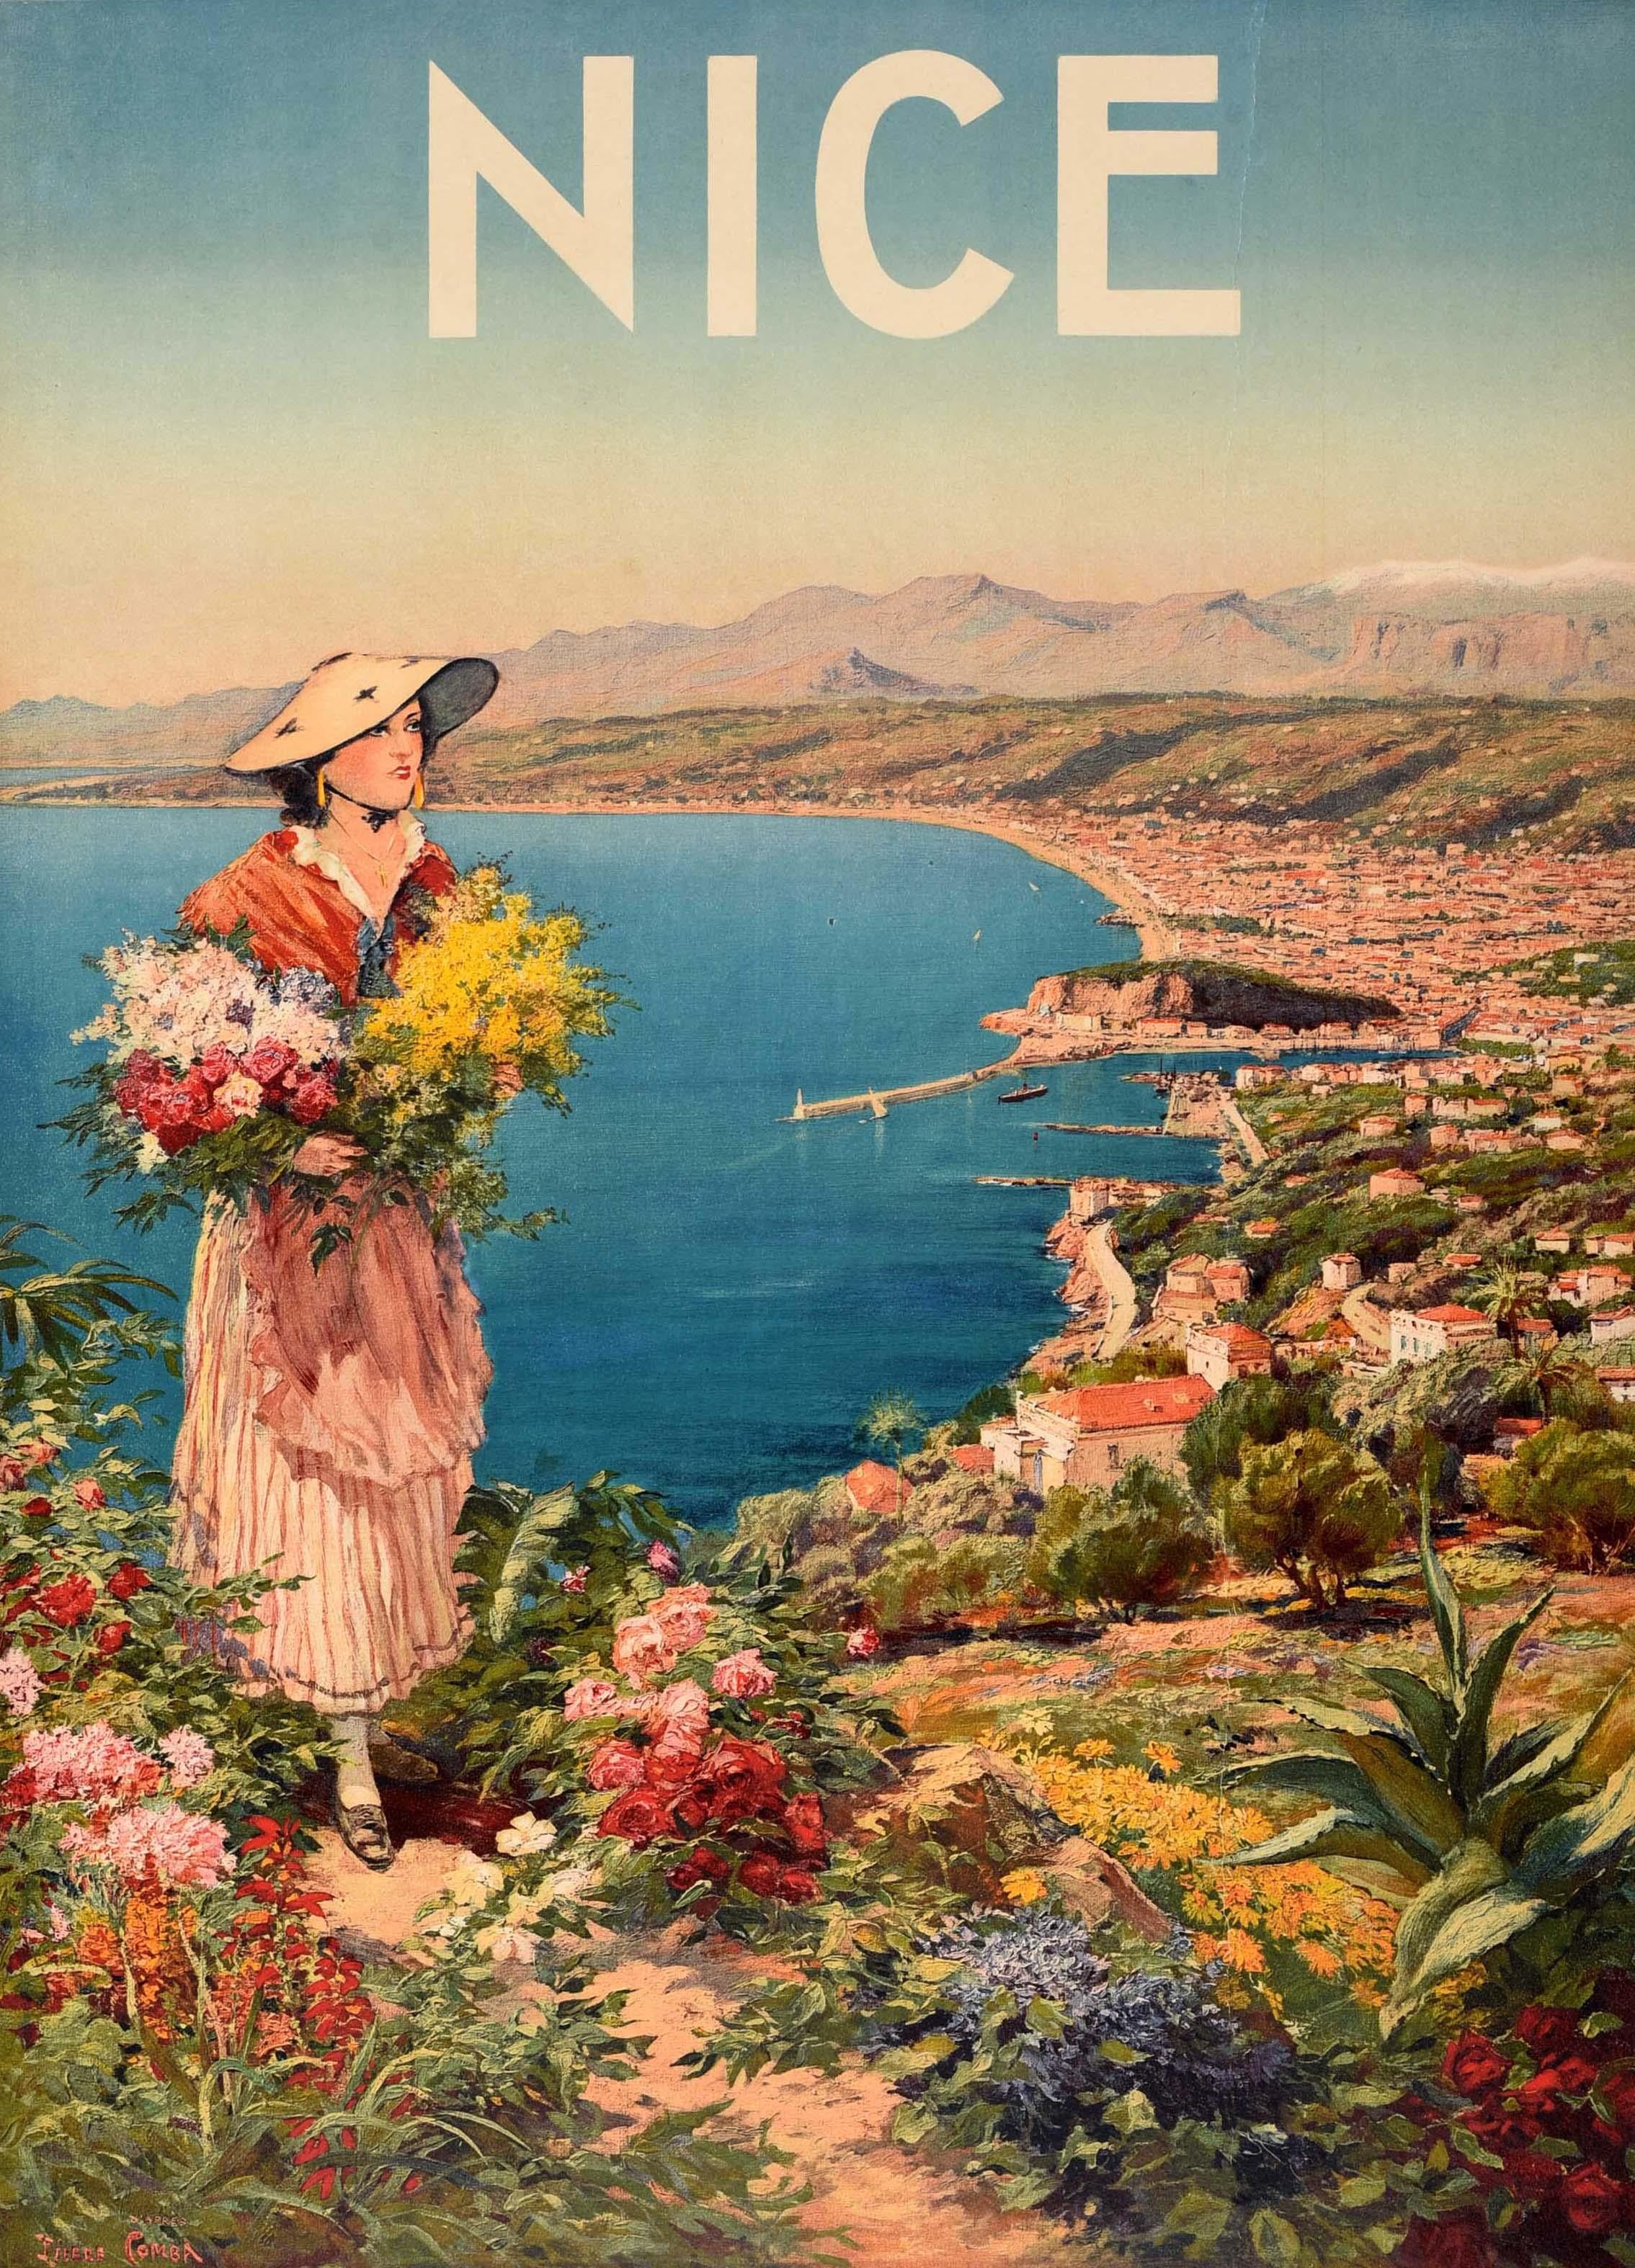 Original vintage travel advertising poster for the Convention du Rotary International Nice et Cote d'Azur / Nice International Rotary Convention on 6-11 June 1937 featuring scenic artwork by Pierre Comba (1859-1934) depicting a young lady wearing a